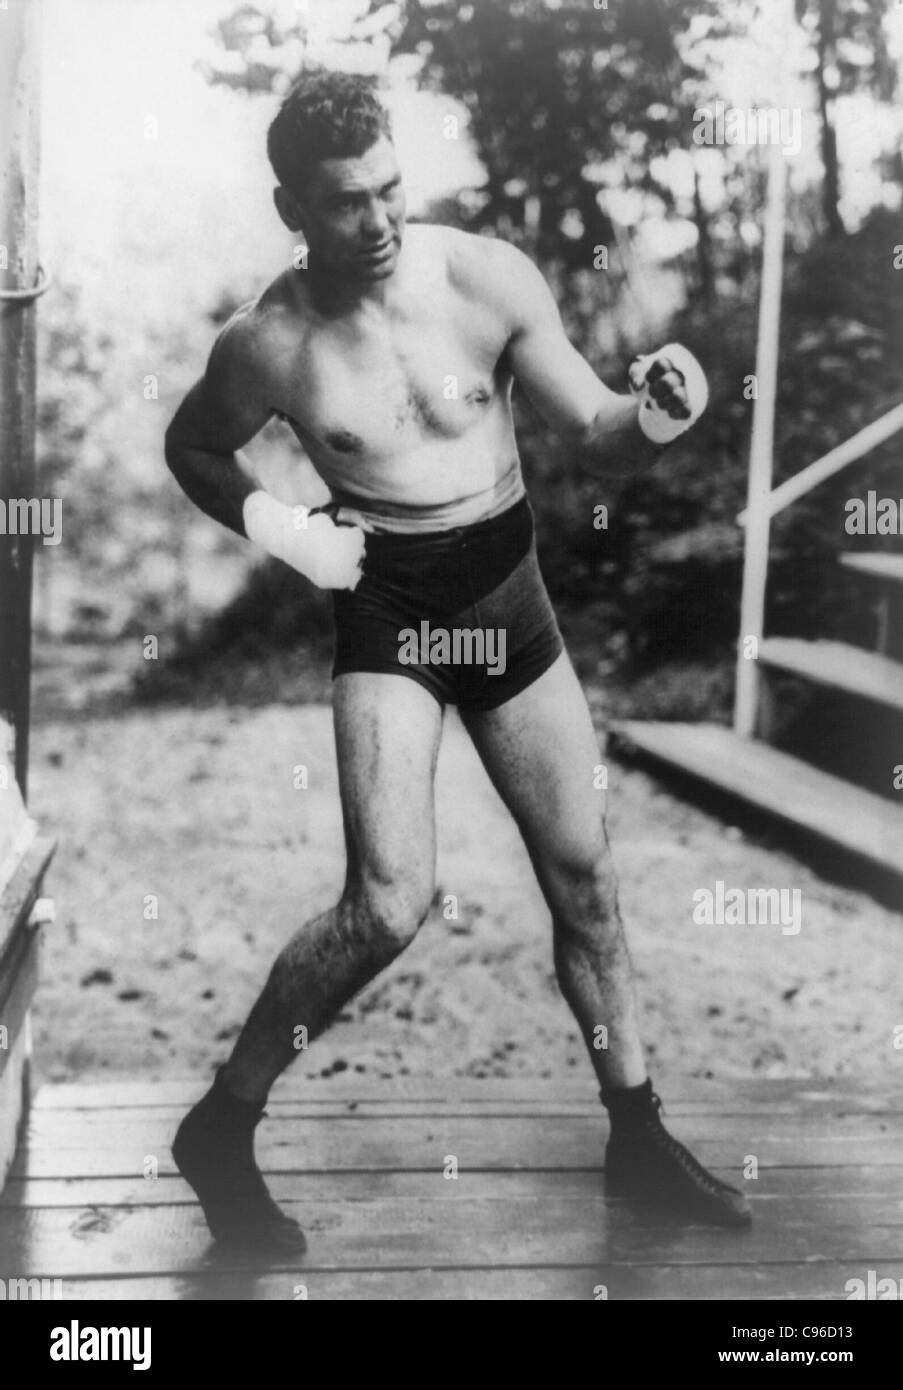 Vintage photo of boxer Jack Dempsey (1895 – 1983) – Dempsey, known as “The Manassa Mauler”, was World Heavyweight Champion from 1919 to 1926. Photo circa 1922. Stock Photo